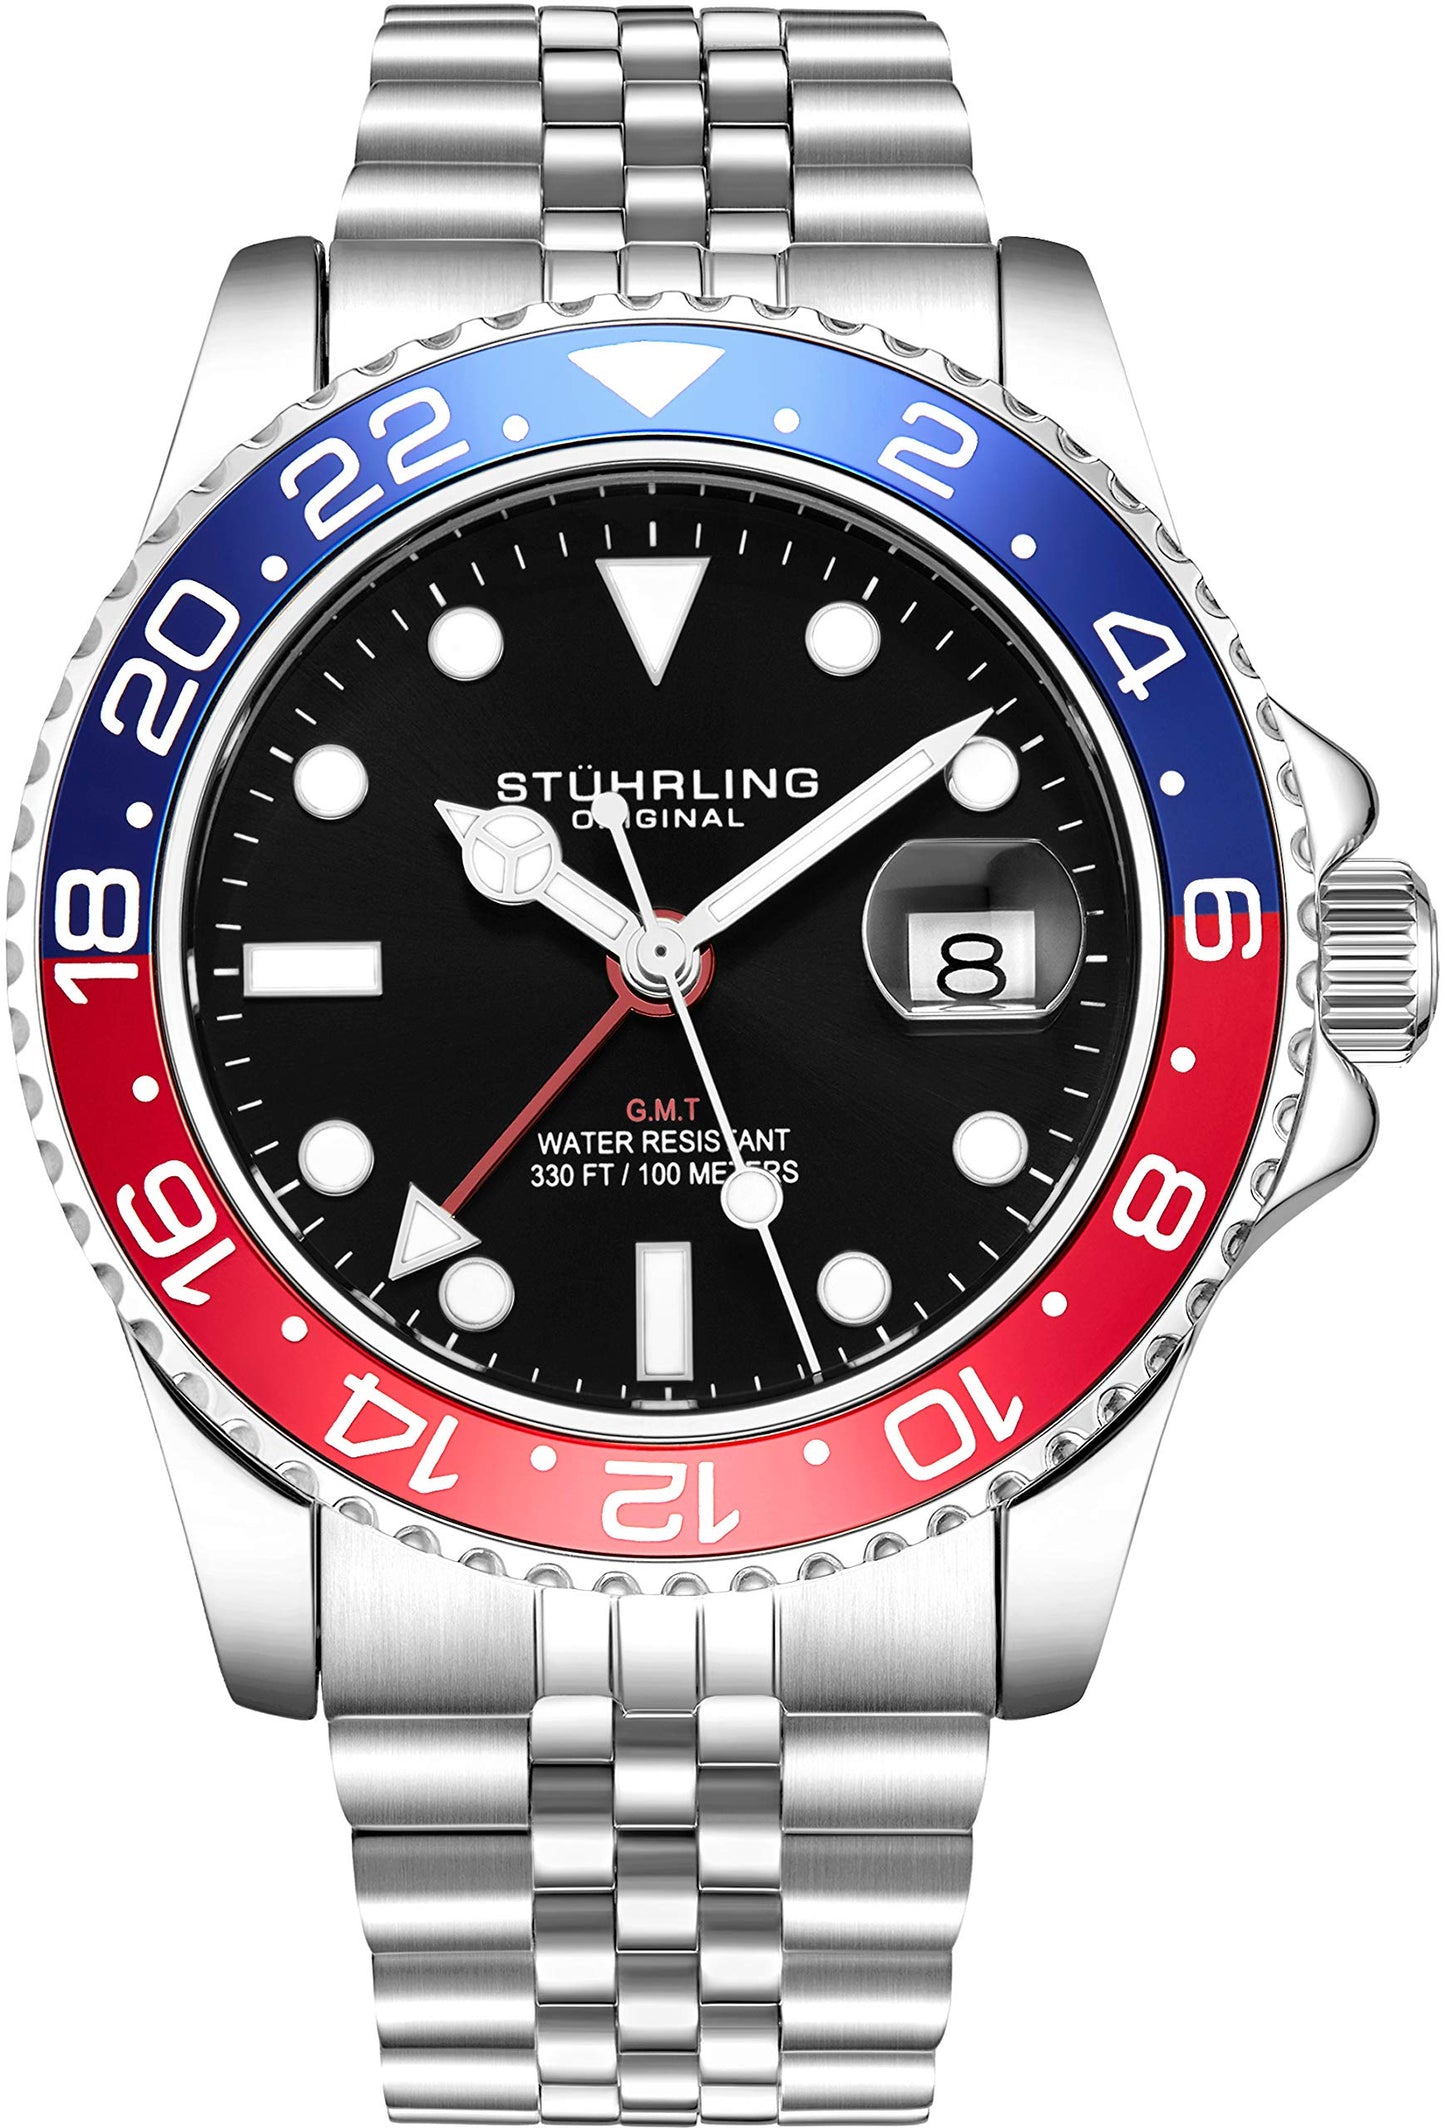 Stuhrling Original Mens Stainless Steel Jubilee Bracelet GMT Watch - Swiss Quartz, Dual Time, Quickset Date with Screw Down Crown, Water Resistant up to 10 ATM, Blue/Red